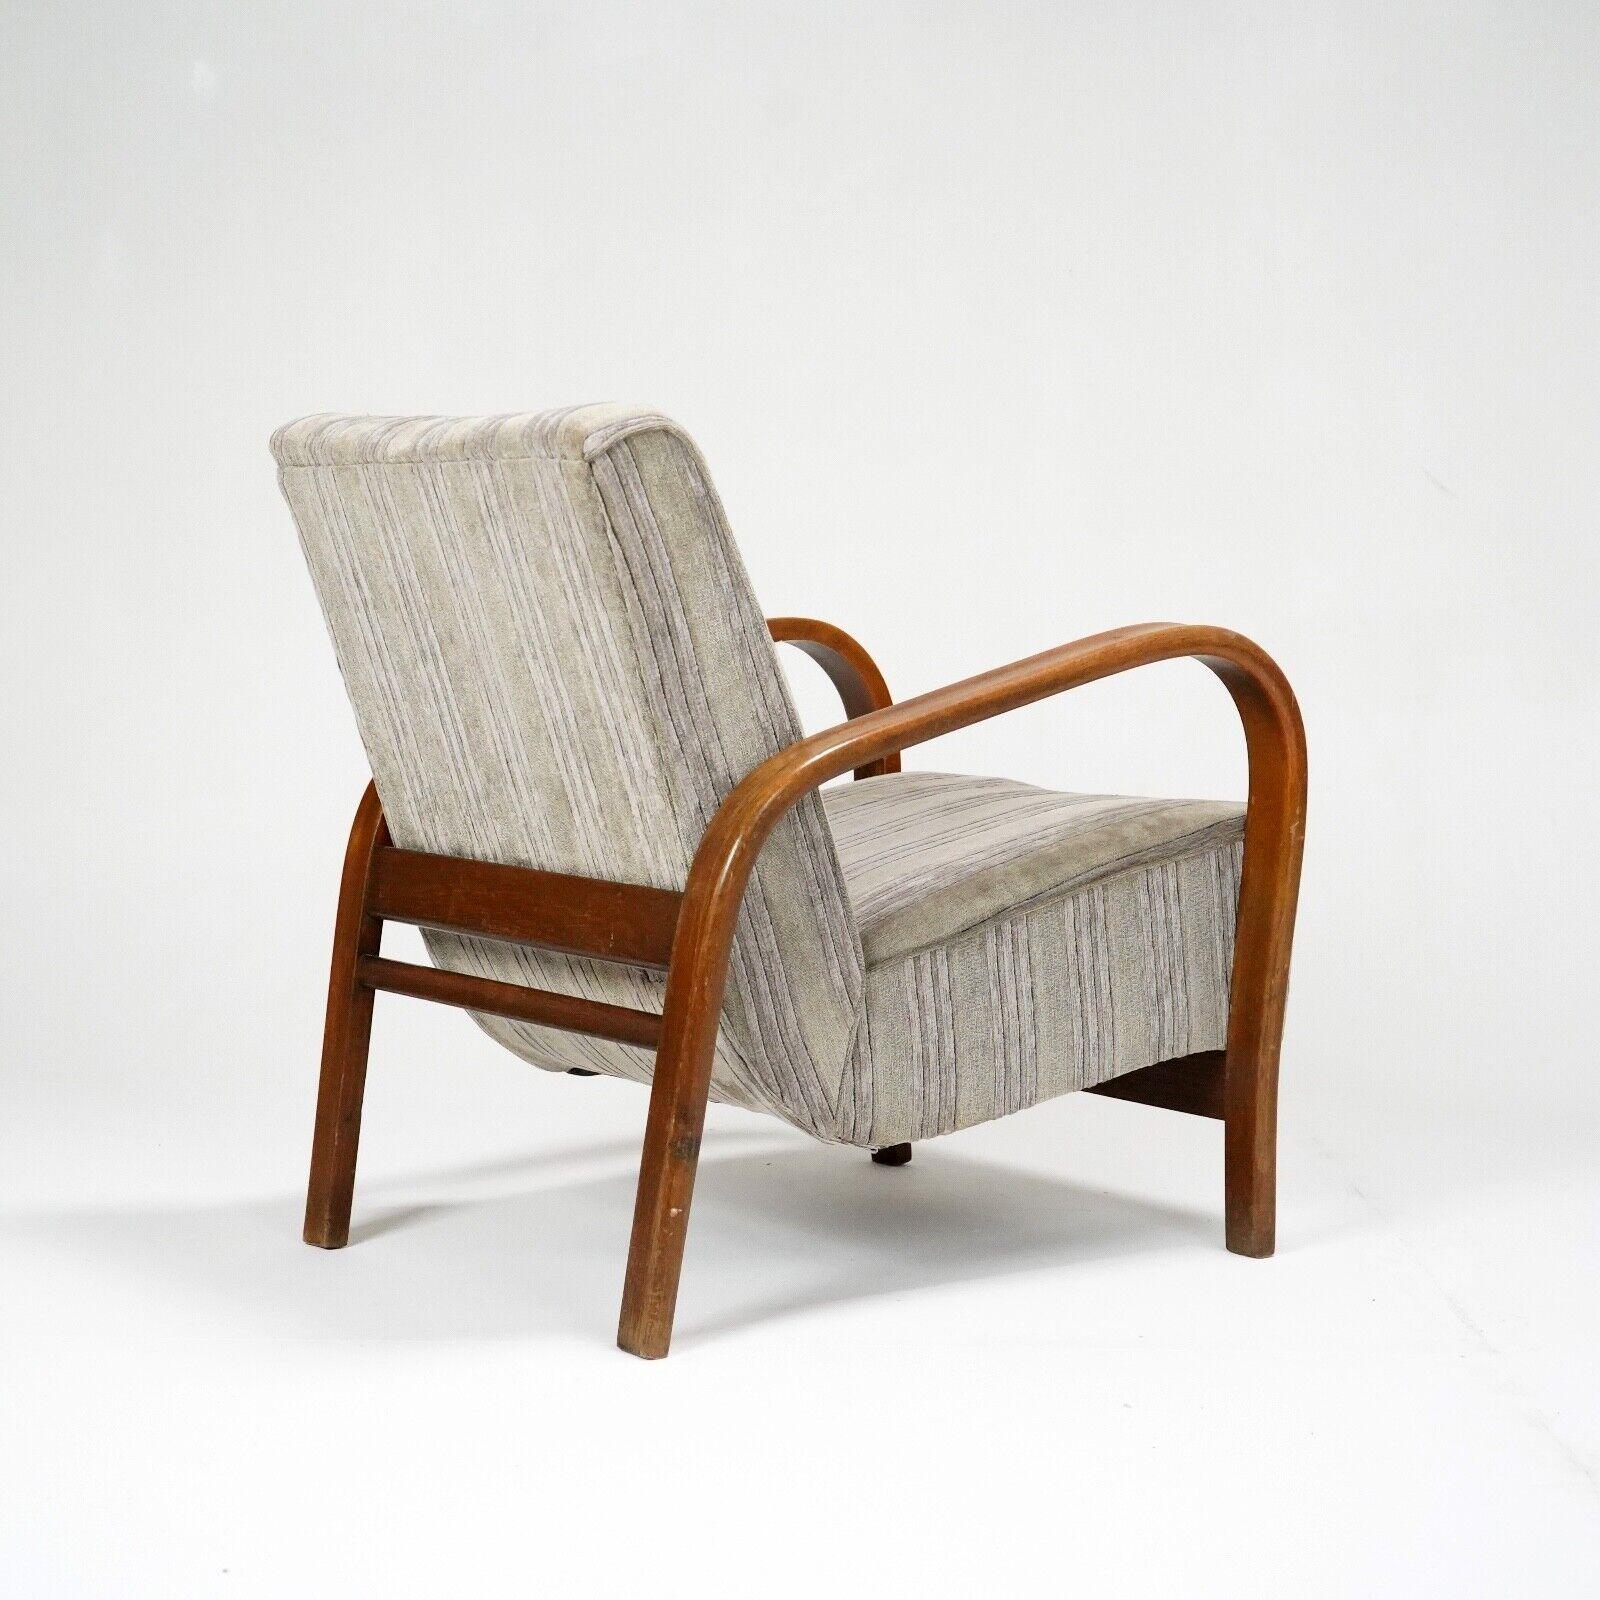 Armchair by Kozelka and Kropacek In Good Condition For Sale In Dorchester, GB